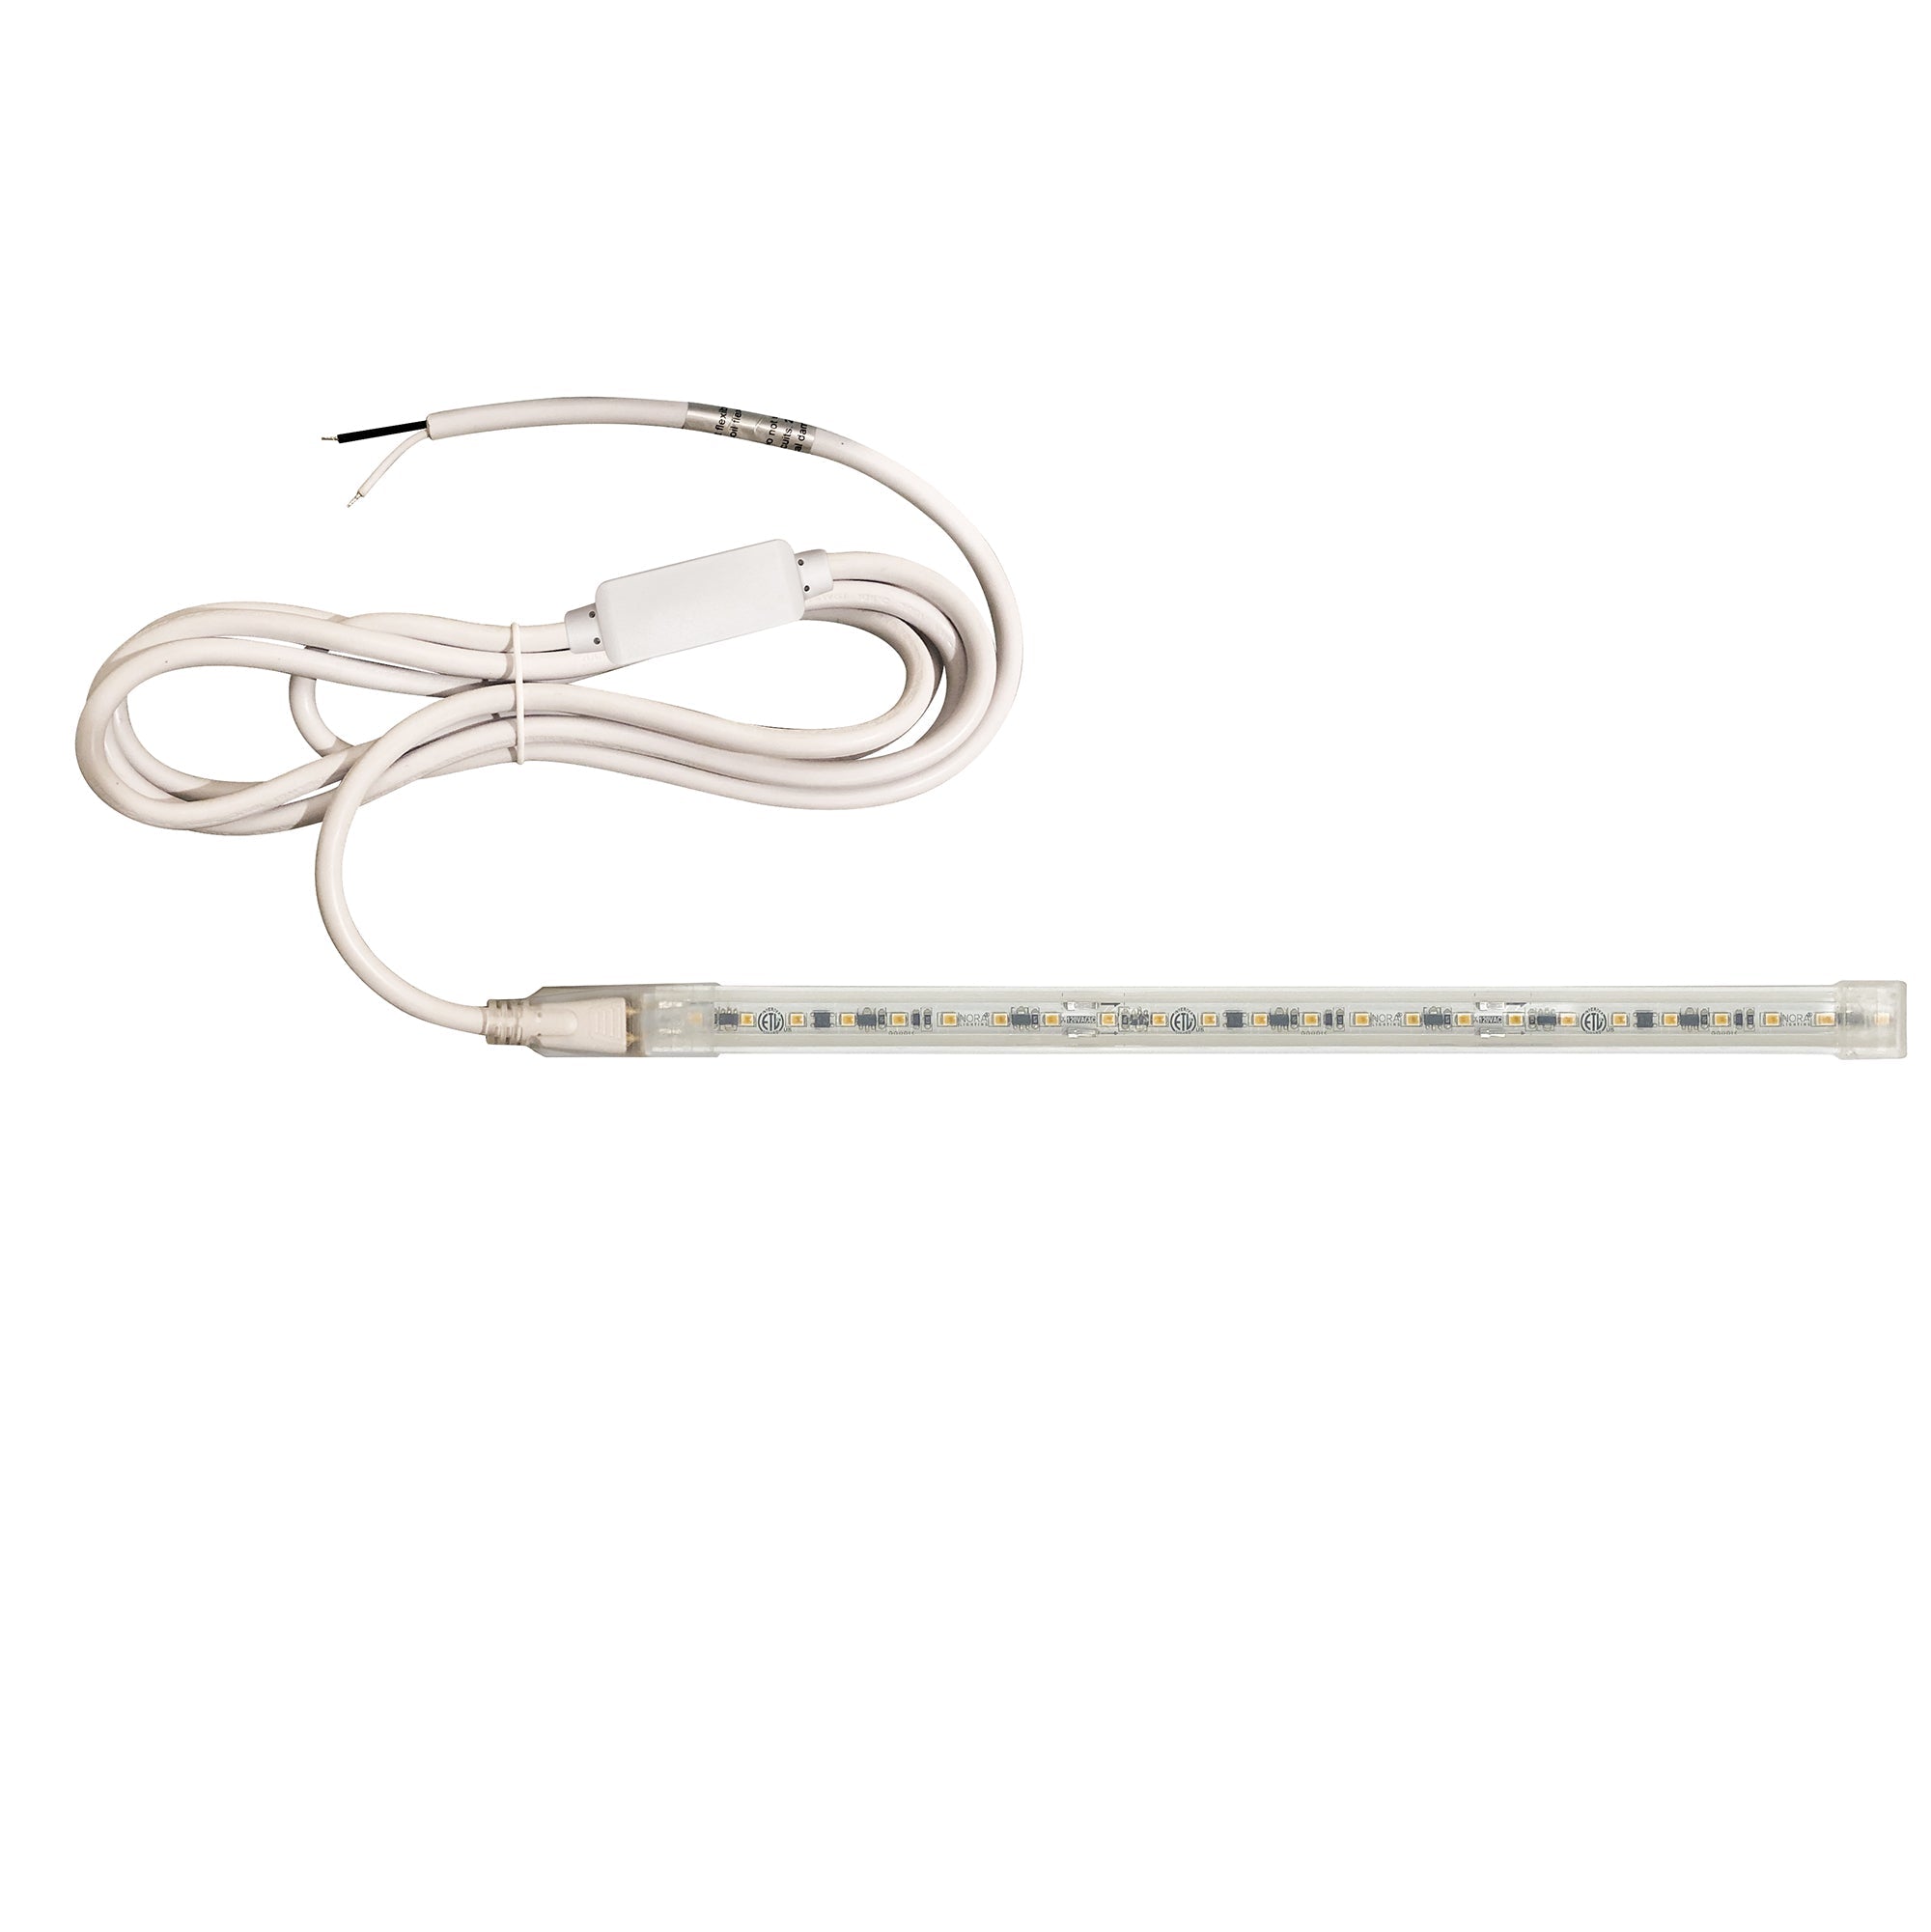 Nora Lighting NUTP13-W12-12-940/HWSP - Accent / Undercabinet - Custom Cut 12-ft 120V Continuous LED Tape Light, 330lm / 3.6W per foot, 4000K, w/ Mounting Clips and 8' Hardwired Power Cord w/ Surge Protector